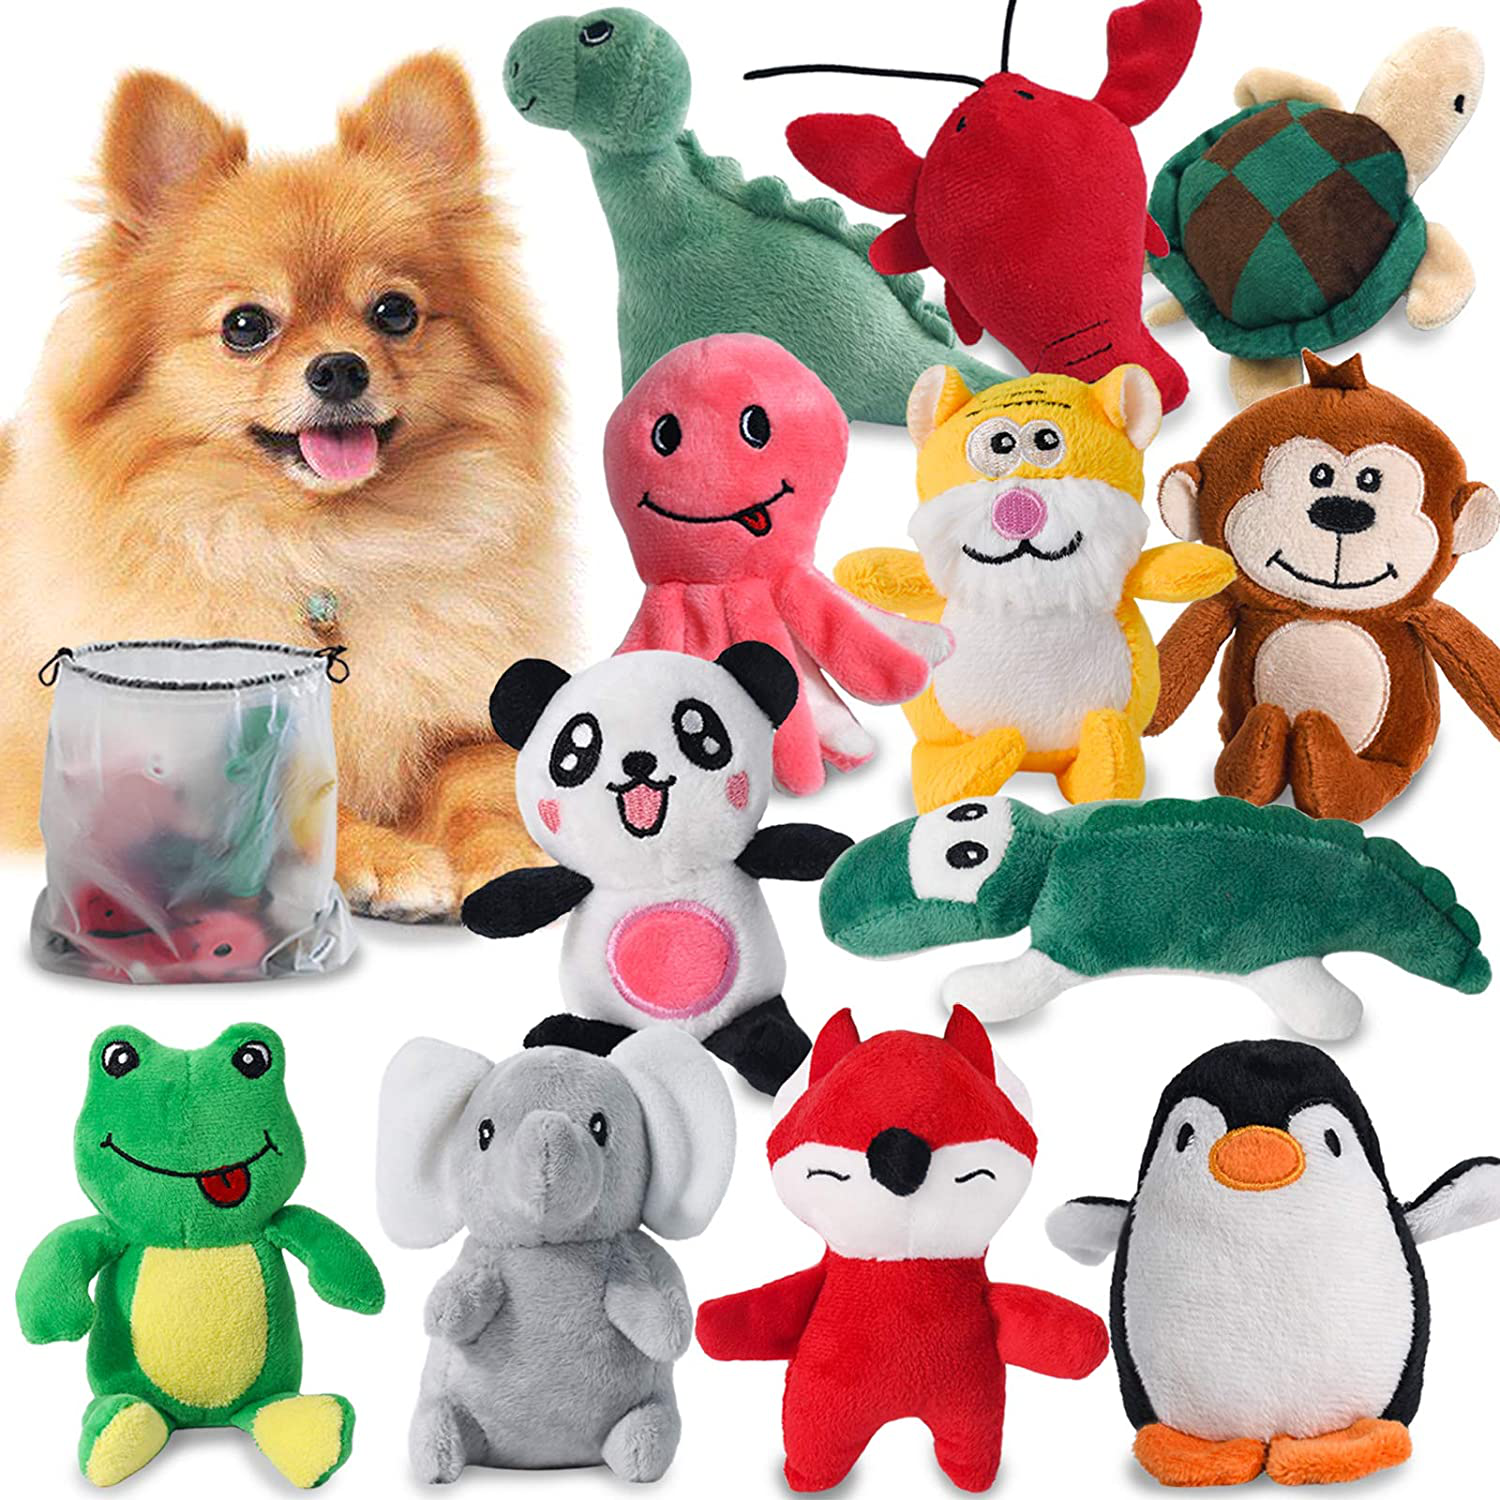 Squeaky Dog Toys for Puppy Small Medium Dogs, Stuffed Samll Dog Toys Bulk with 12 Plush Pet Dog Toy Set, Cute Safe Dog Chew Toys Pack for Puppies Teething Animals & Pet Supplies > Pet Supplies > Dog Supplies > Dog Toys LEGEND SANDY 12 Dog Toys  